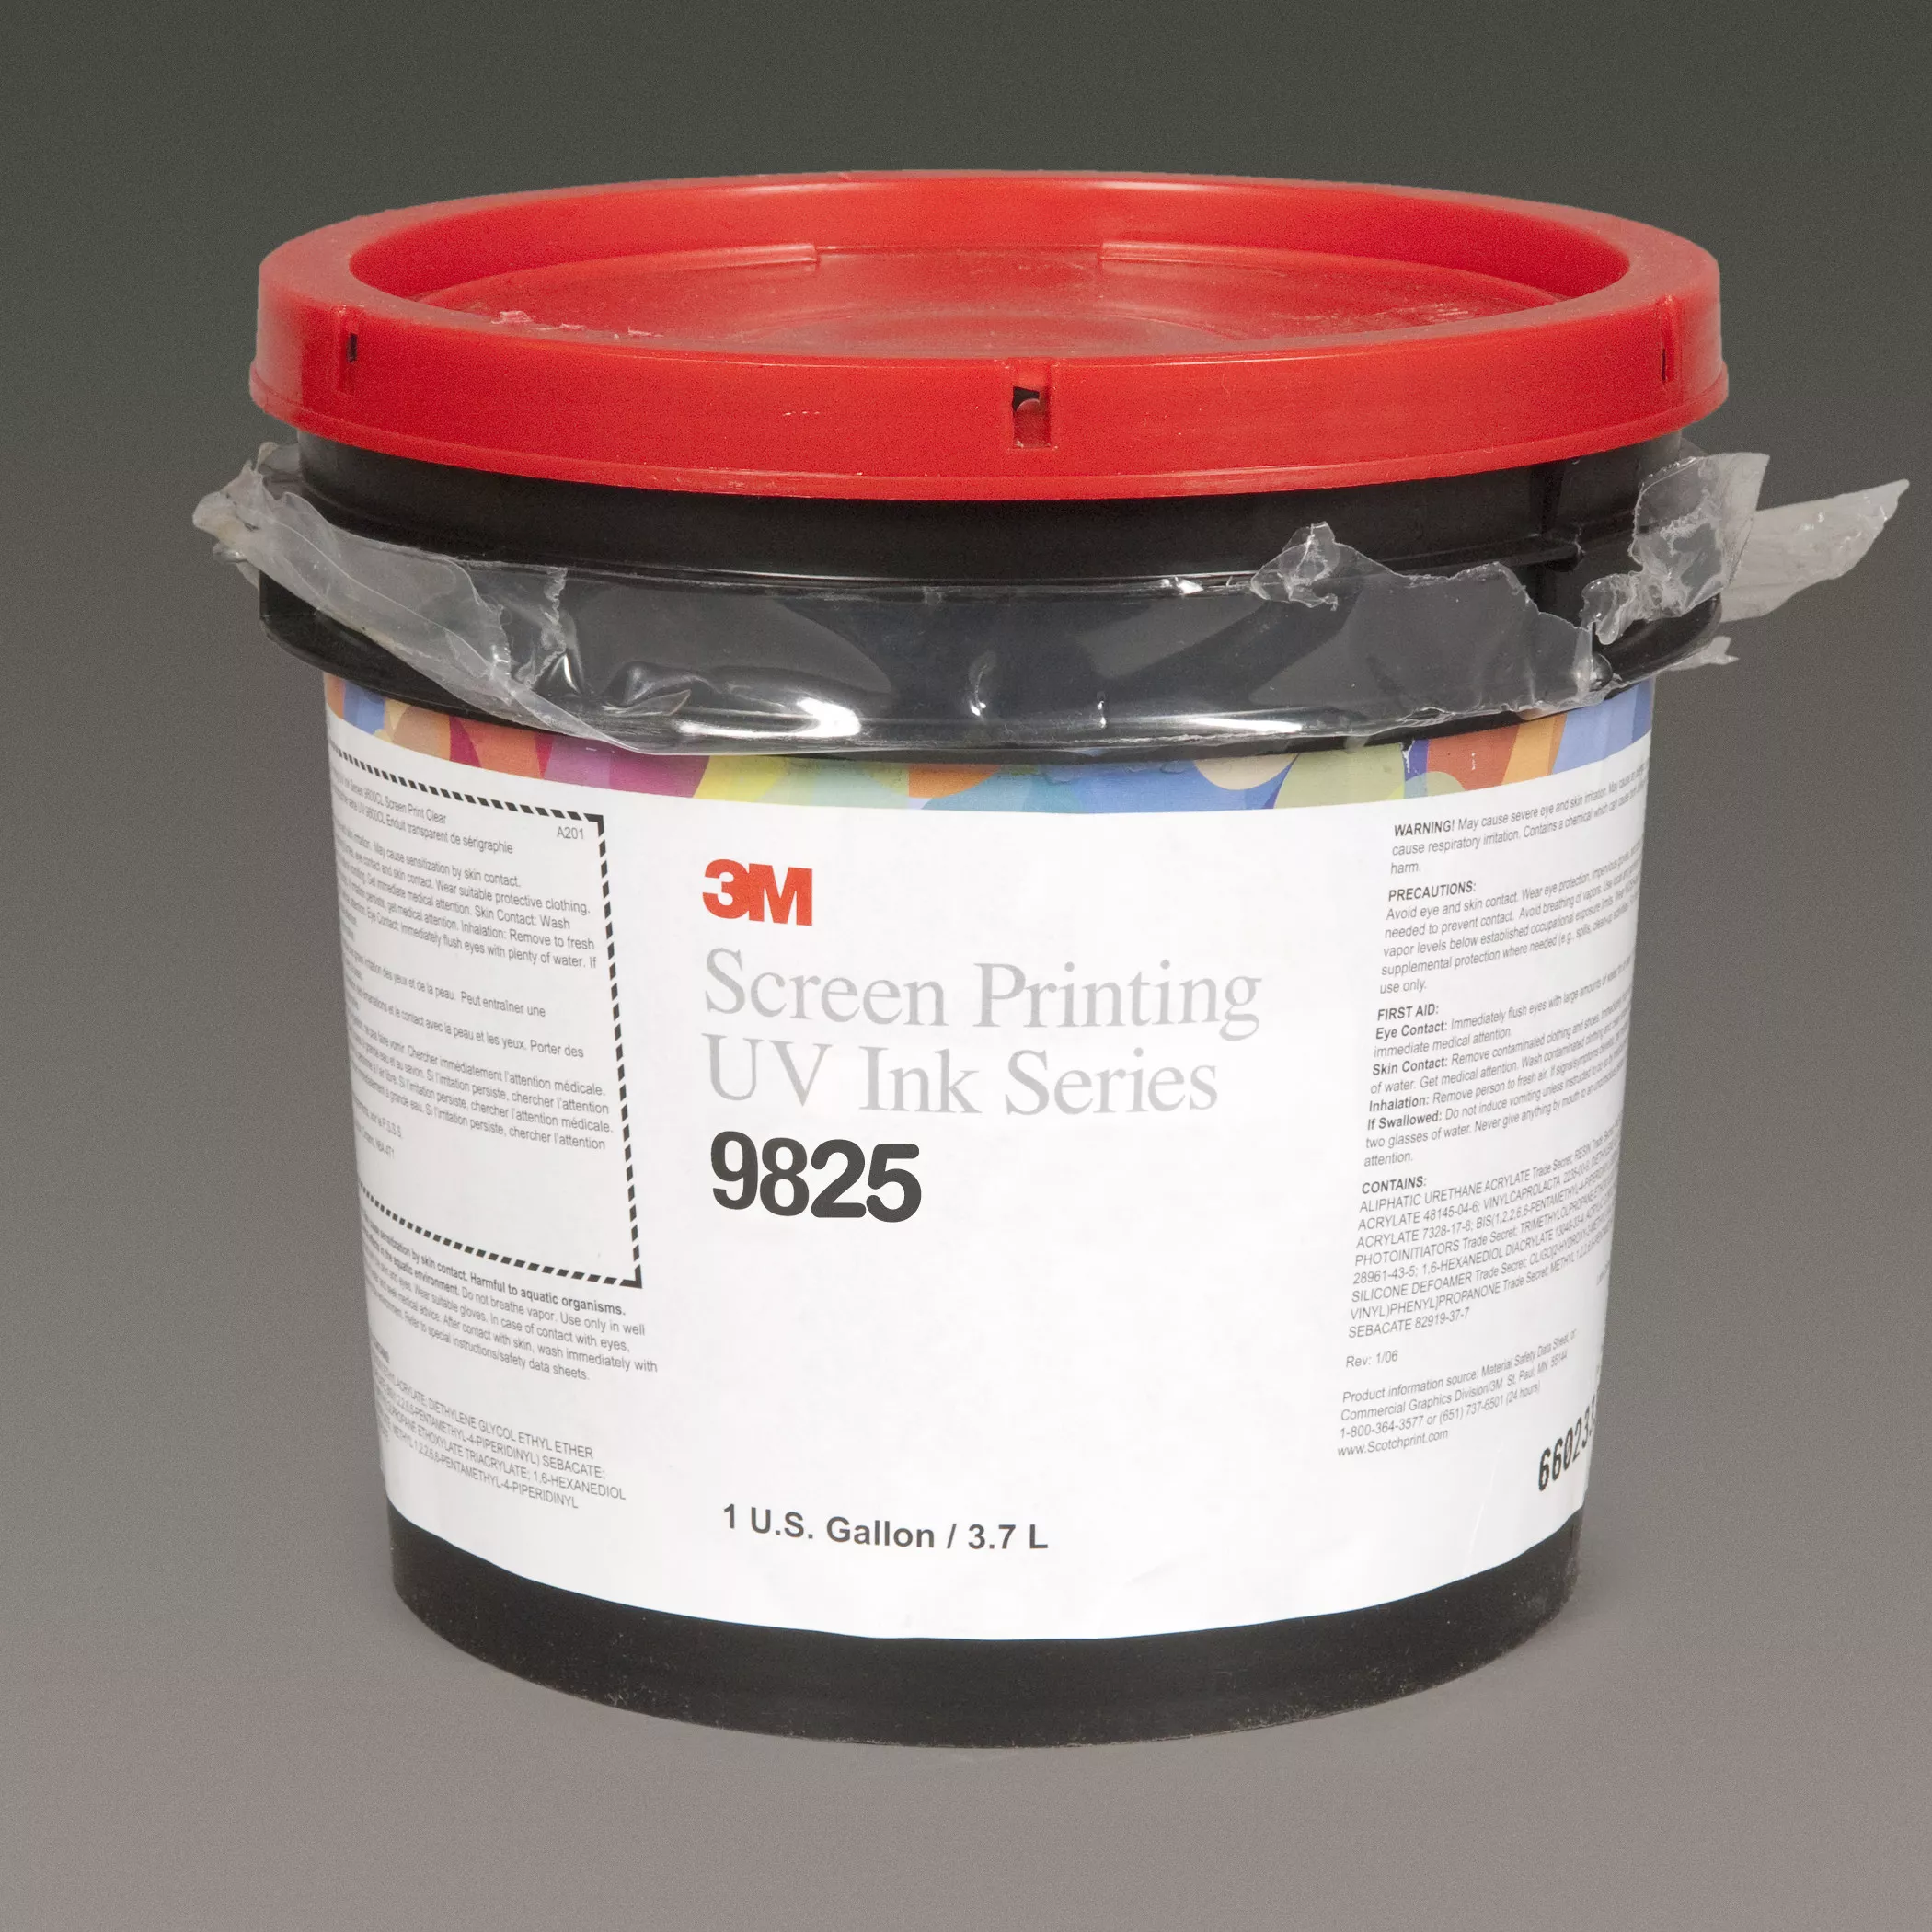 3M™ Screen Printing UV Ink 9825, Transparent Red (BS), 1 Gallon
Container